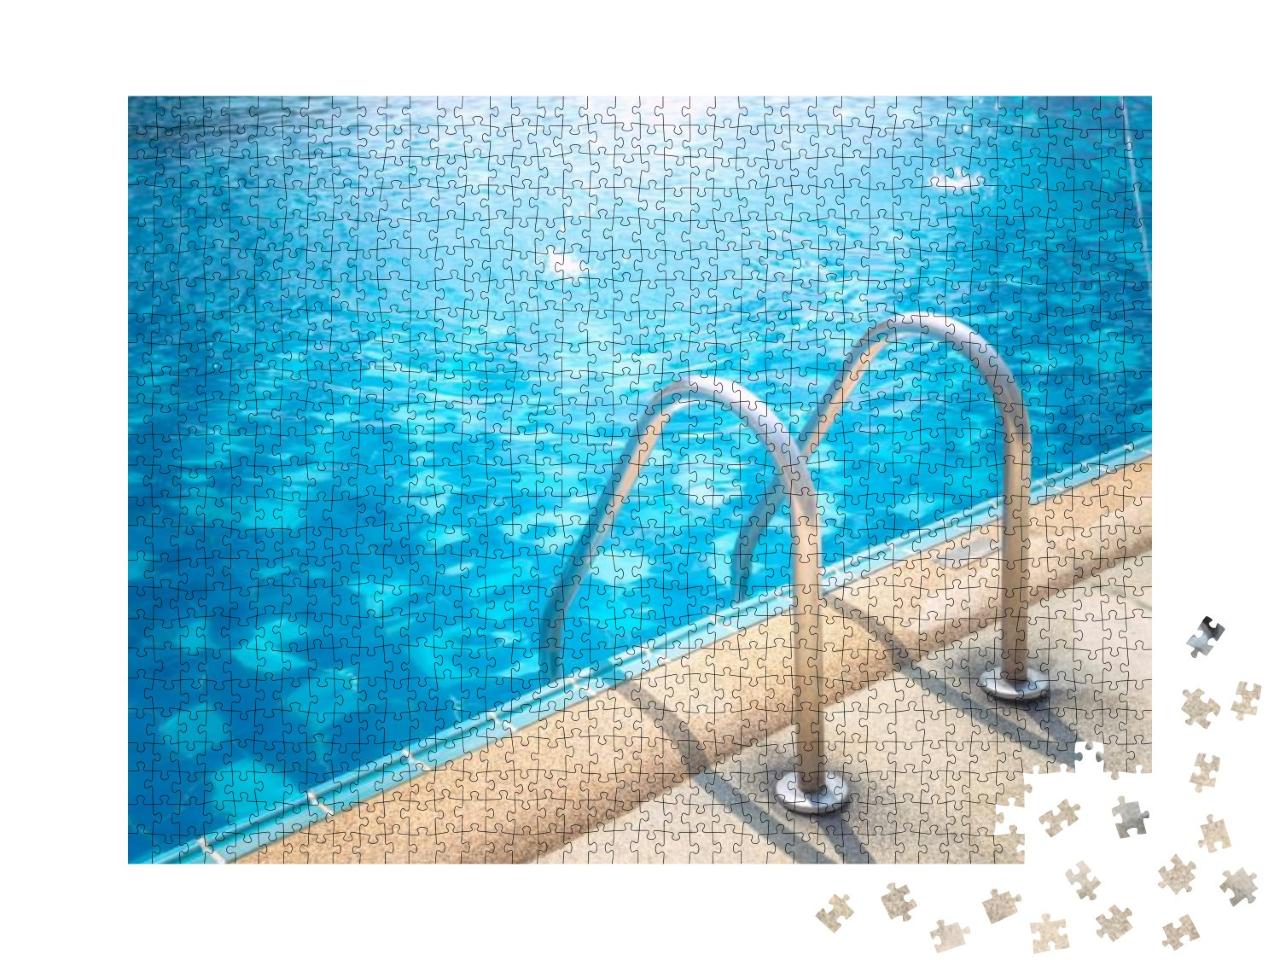 Grab Bars Ladder in the Blue Swimming Pool... Jigsaw Puzzle with 1000 pieces